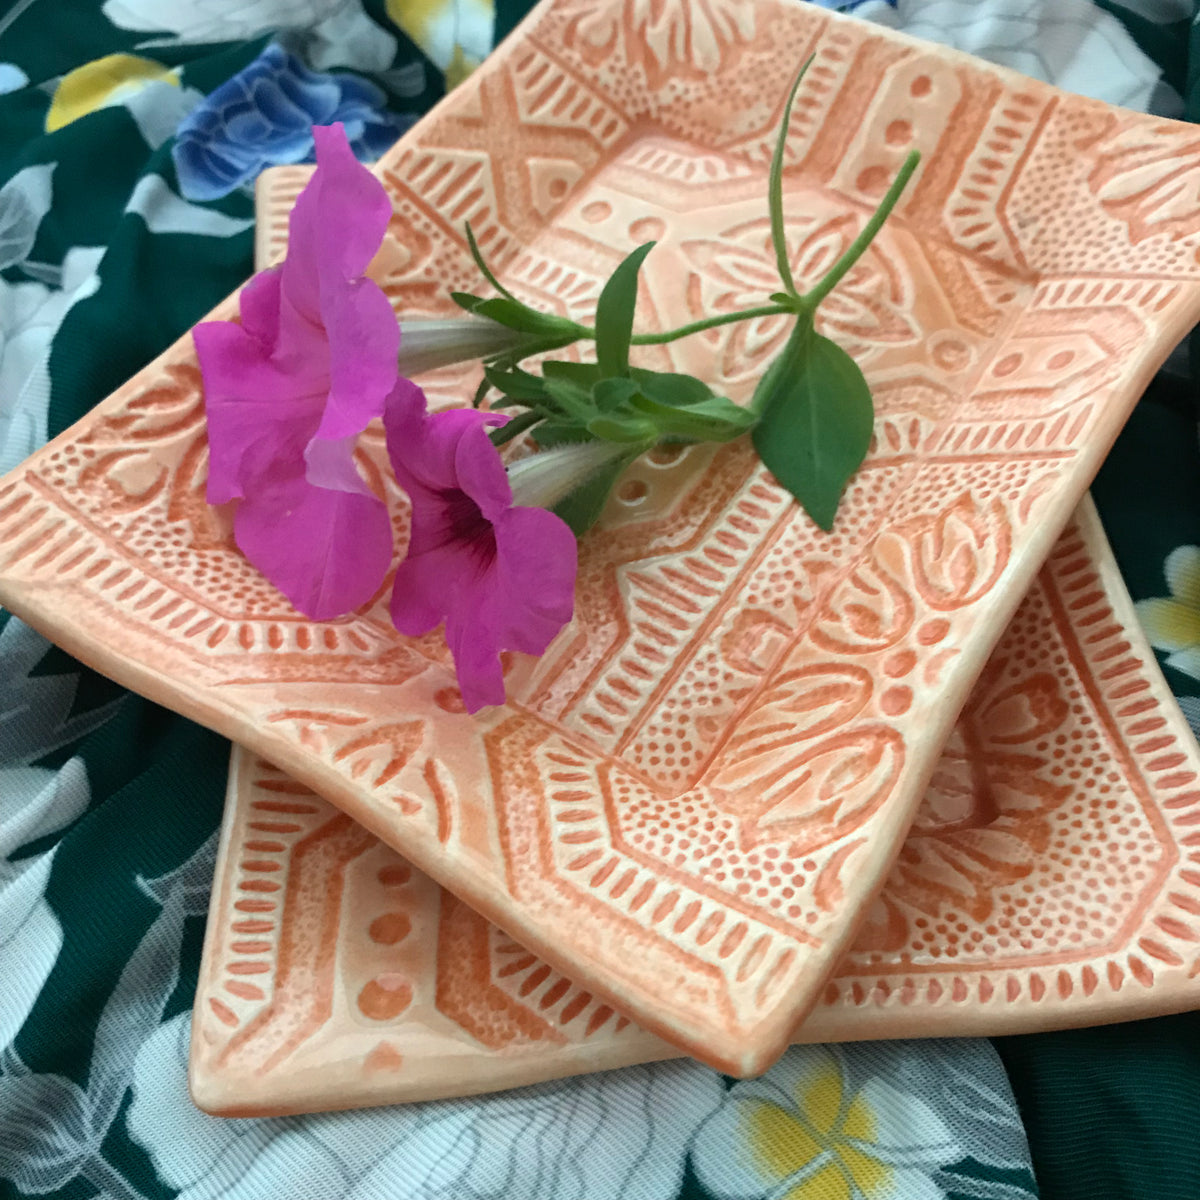 Our Handmade Earthenware Tray Is Glazed In a Pretty Orange Color.  